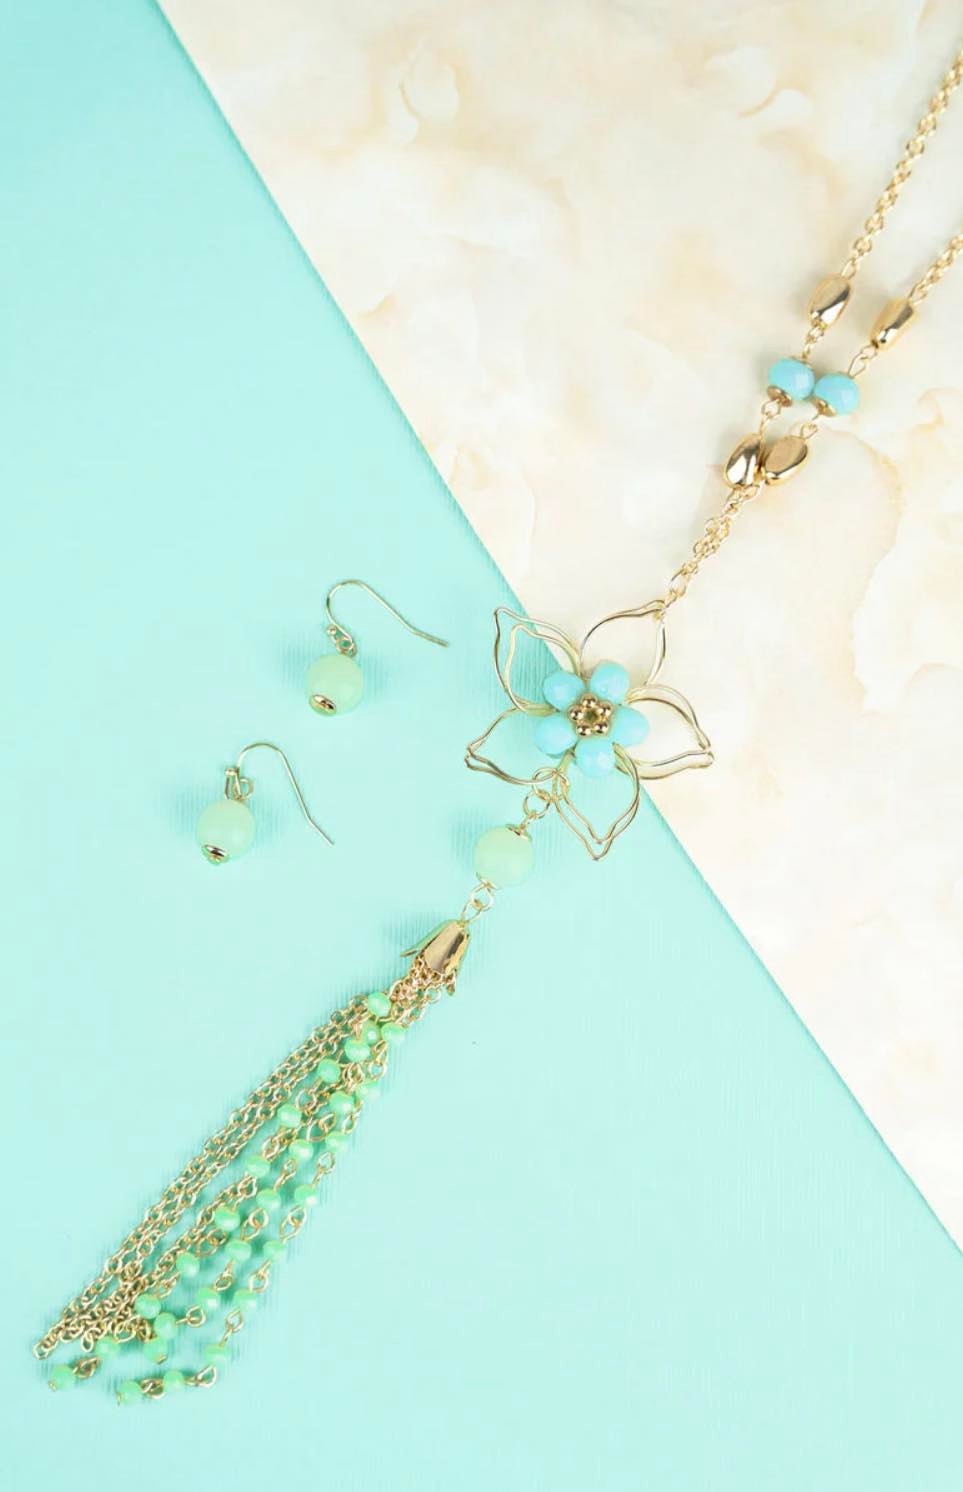 New Release Mint Floretta Necklace And Earring Set - Heather's Heavenly Boutique